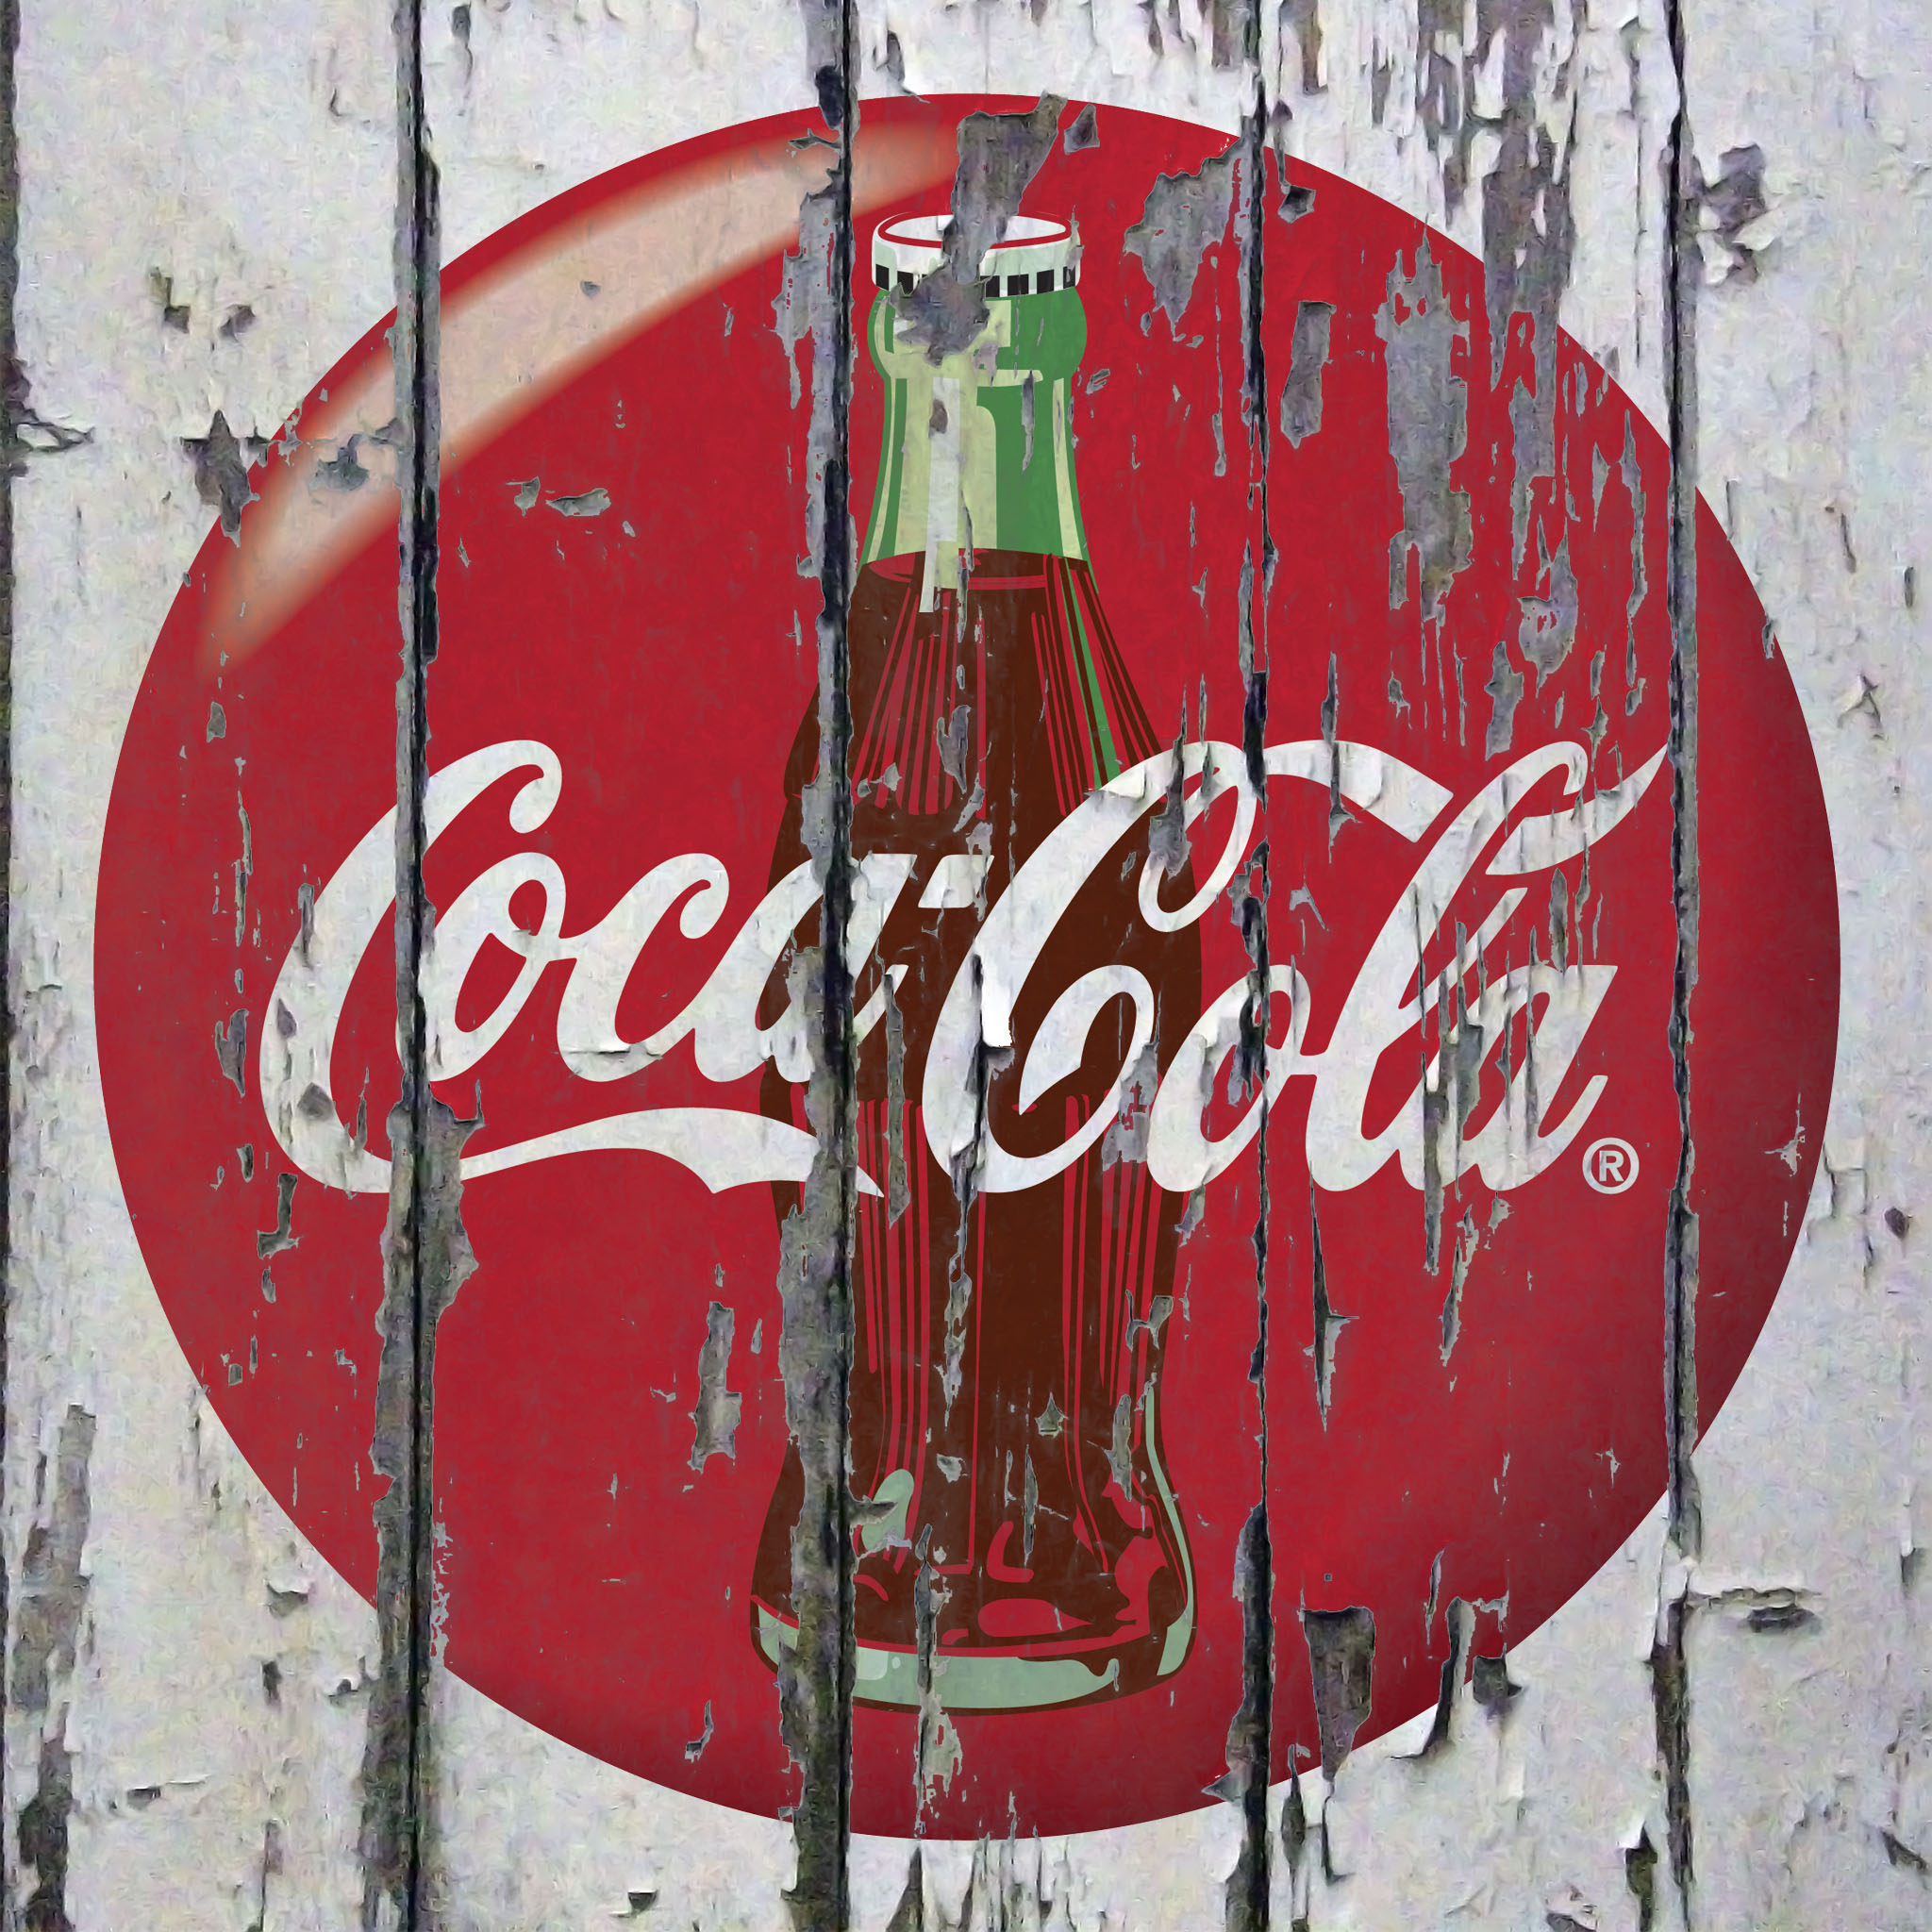 Download Vintage Coca Cola Wallpaper For Iphone #0anyy ...